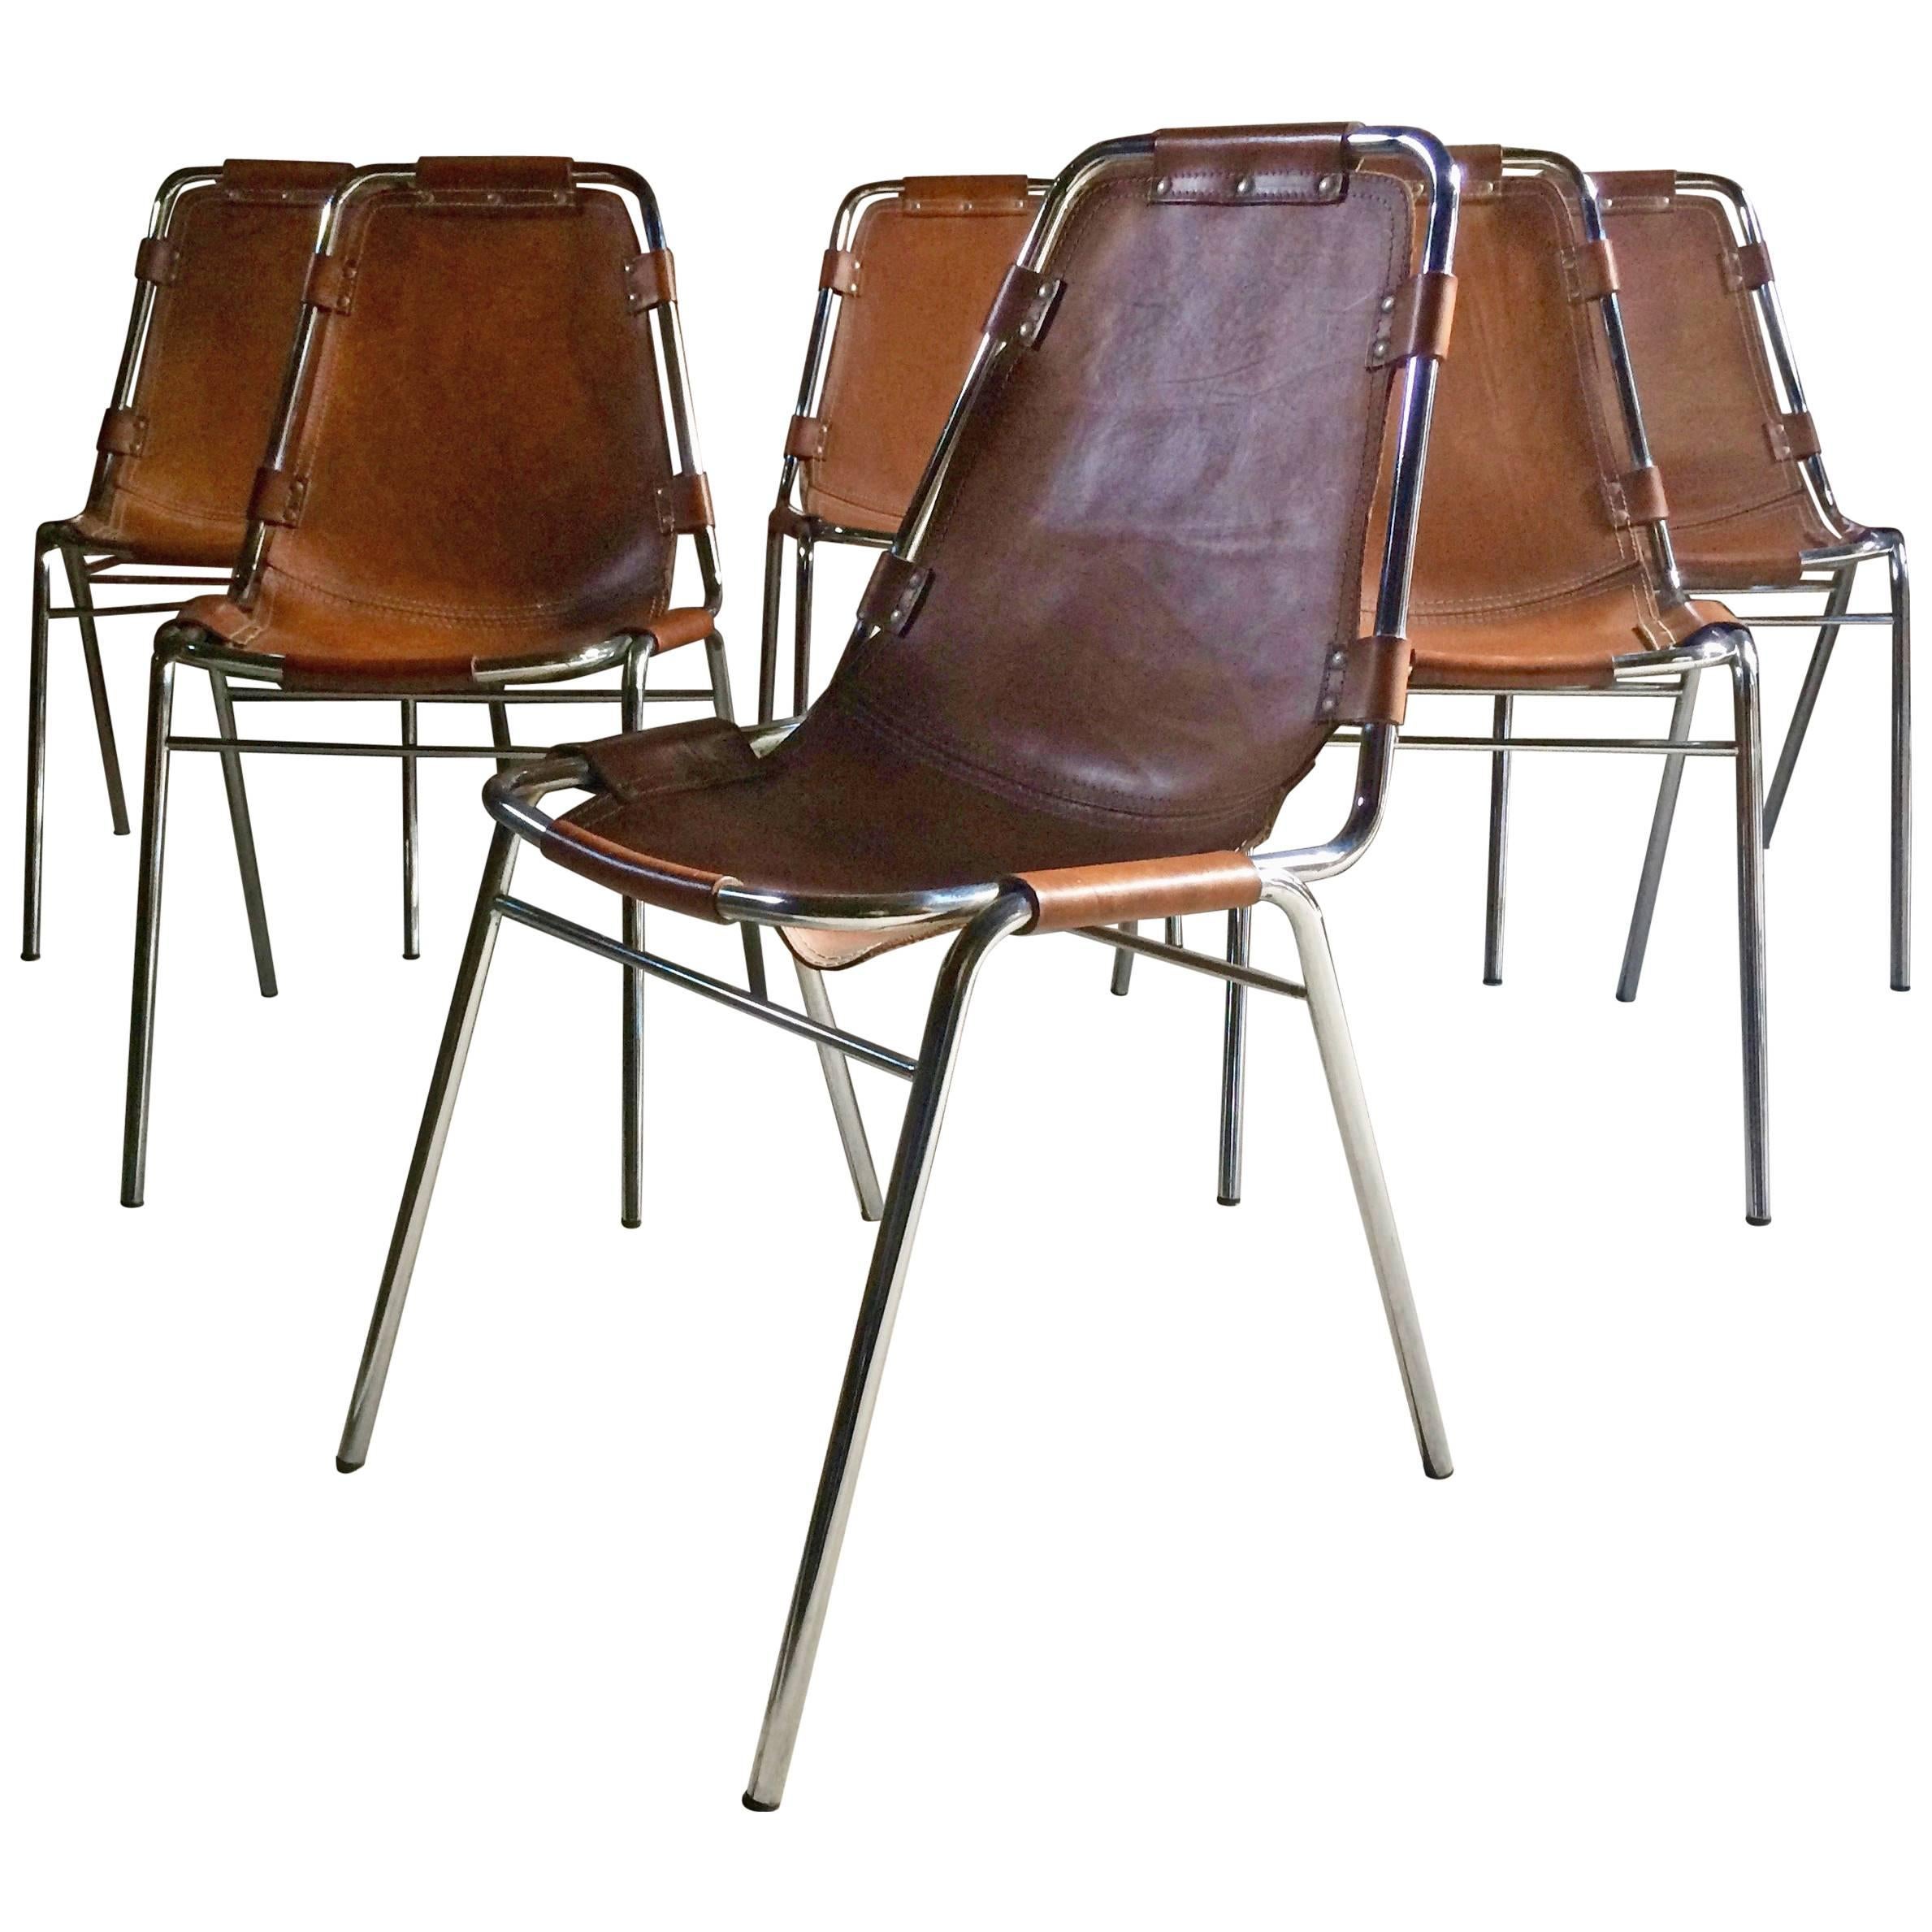 Les Arcs Chairs Charlotte Perriand Dining Chairs Leather, Set of Six, 1960s